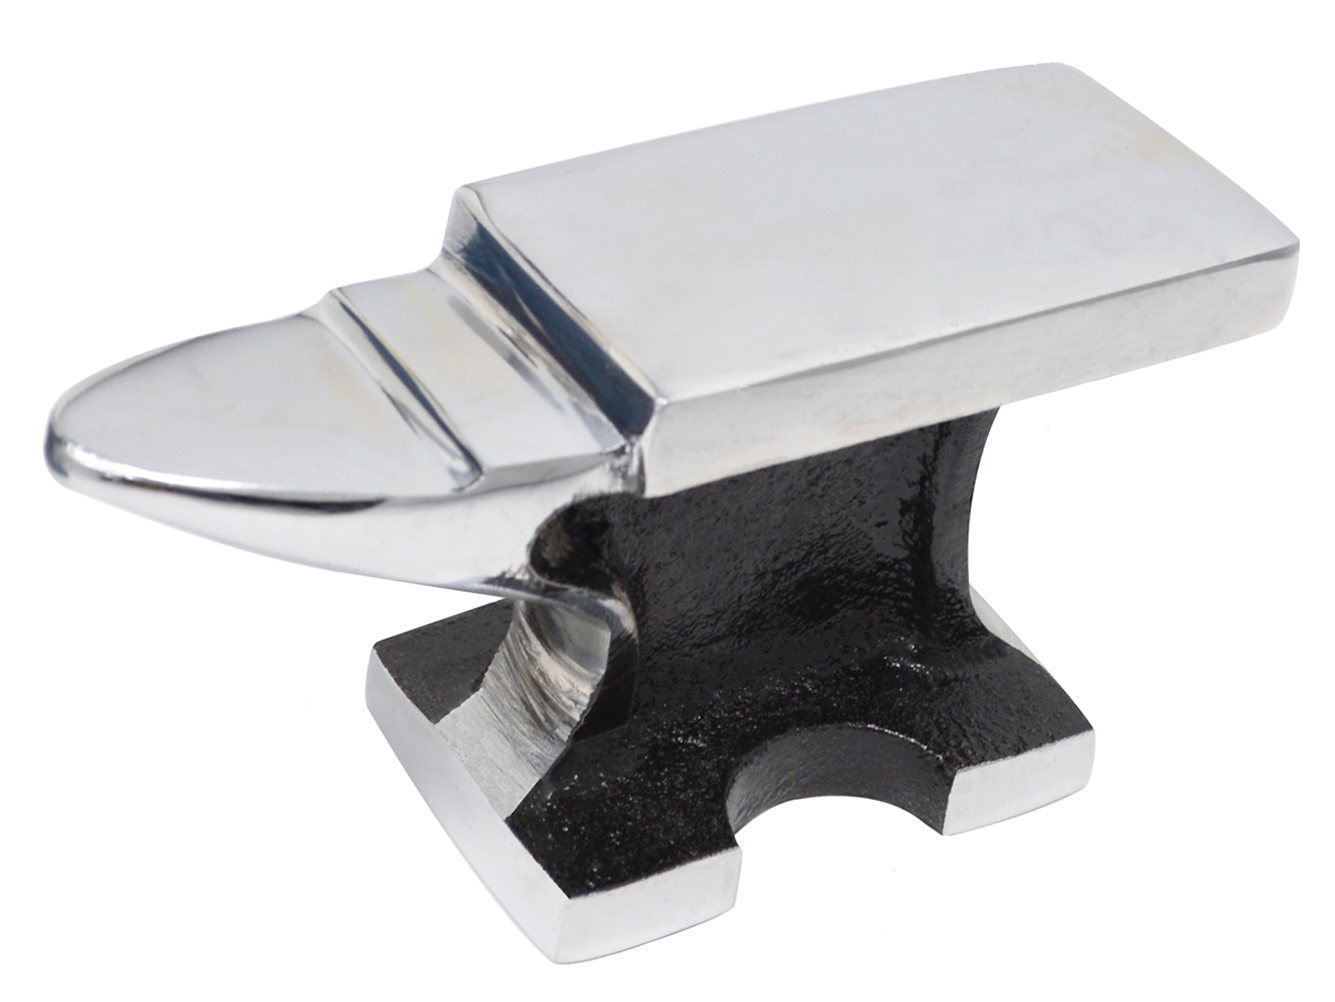 2 Lb Steel Anvil with Chrome Finish Jewelry Making Metal Forming Tool -  FORM-0014 